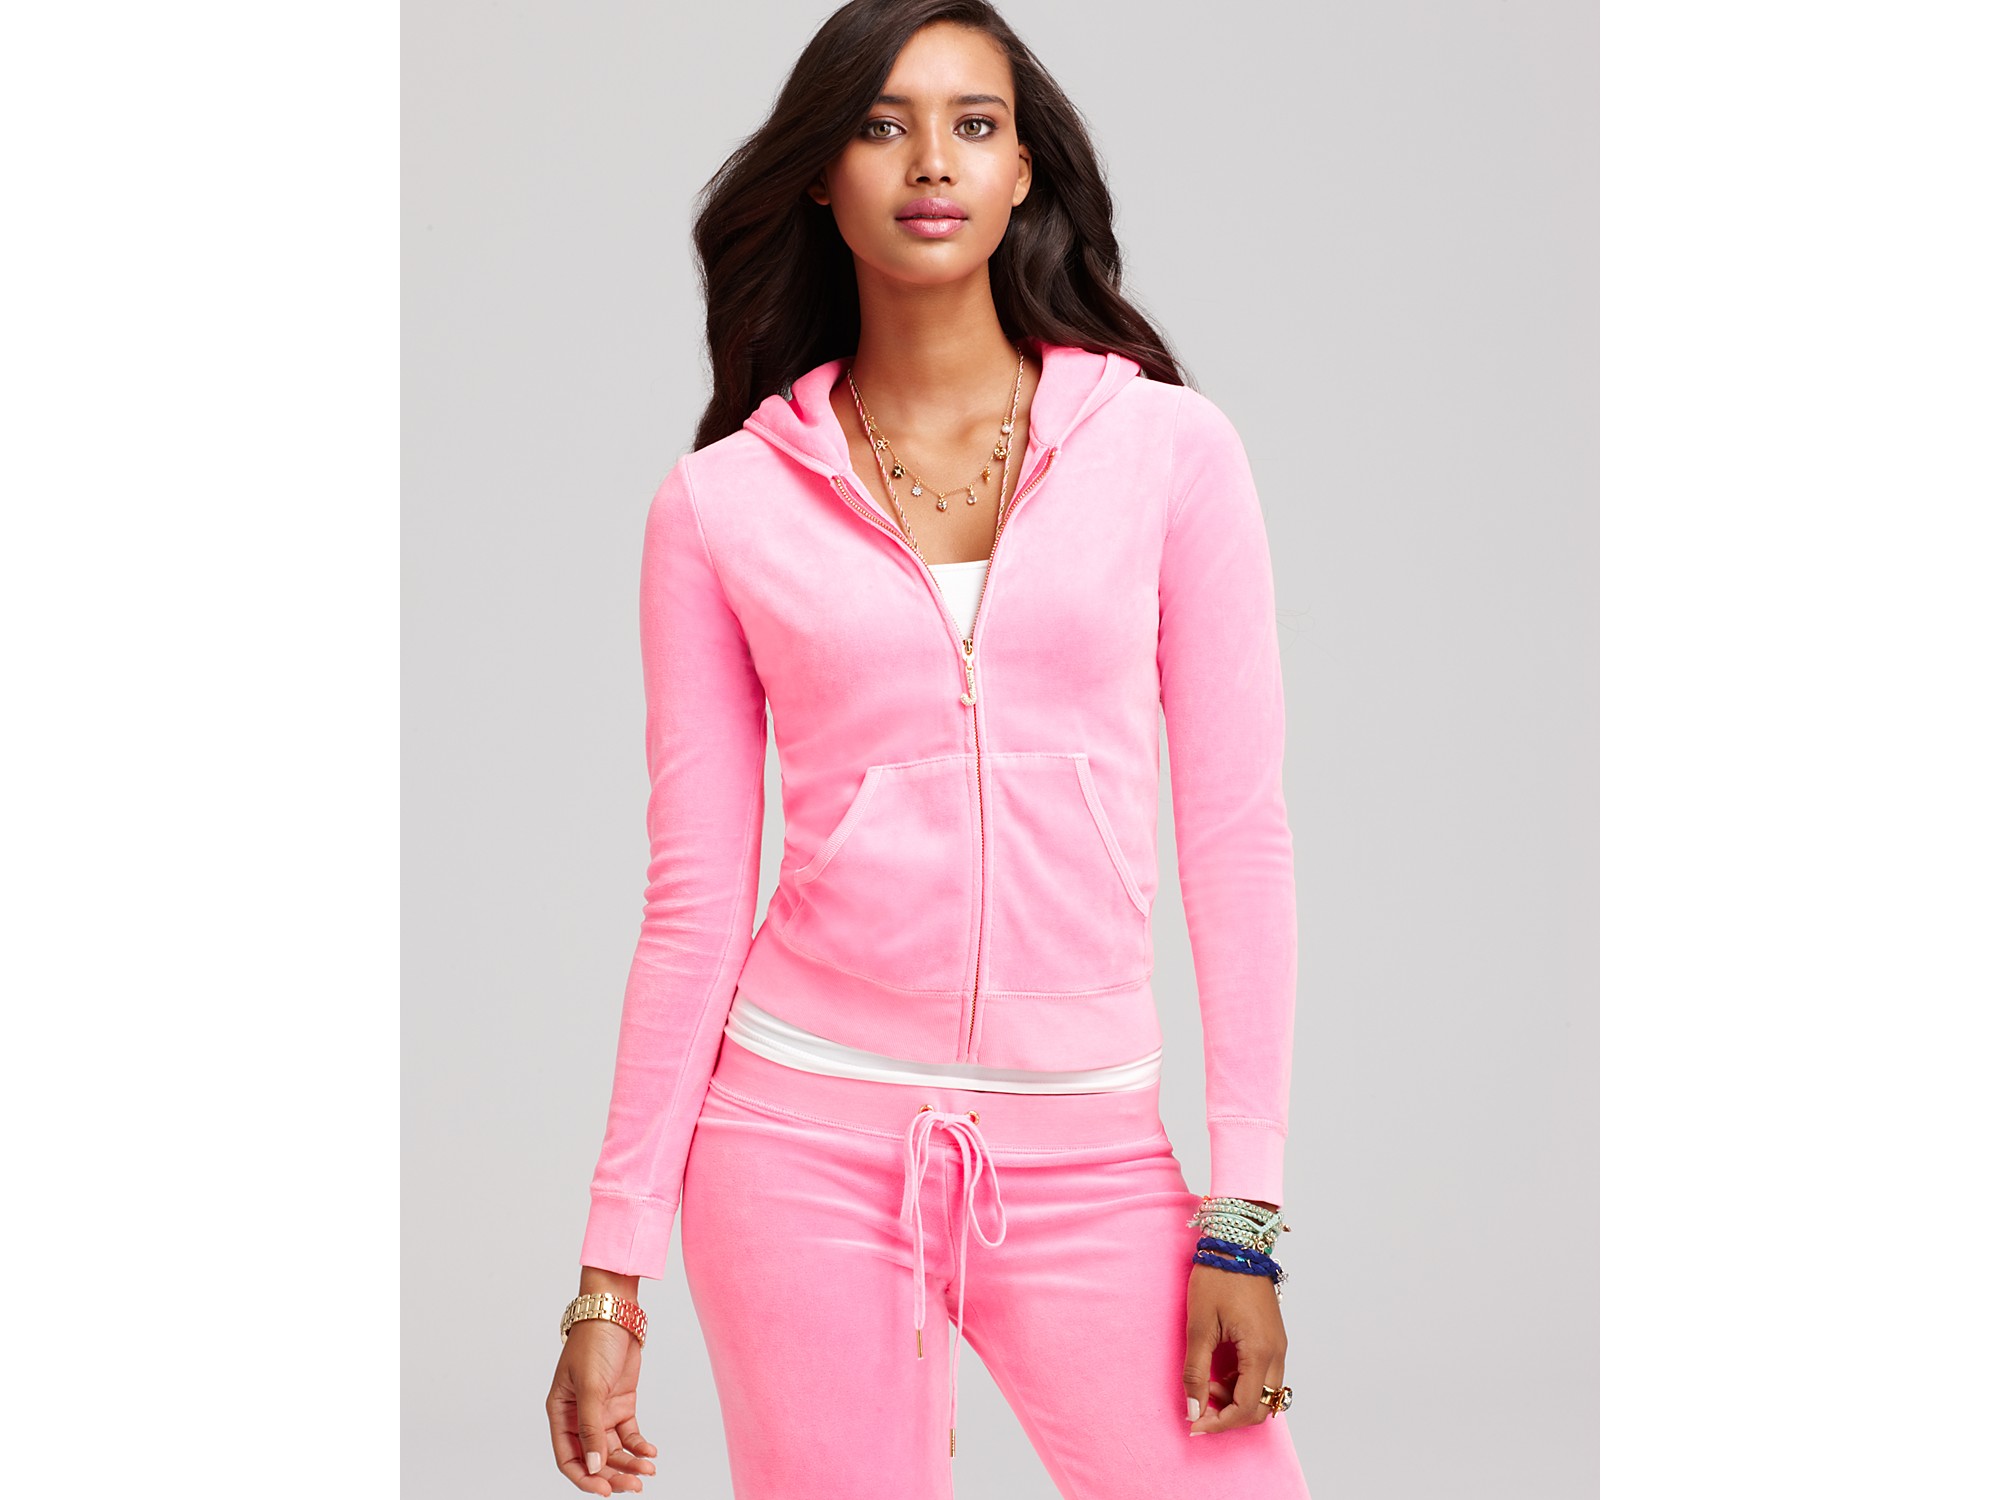 Lyst - Juicy Couture Original Zip Velour Hoodie with Embellished Pull ...